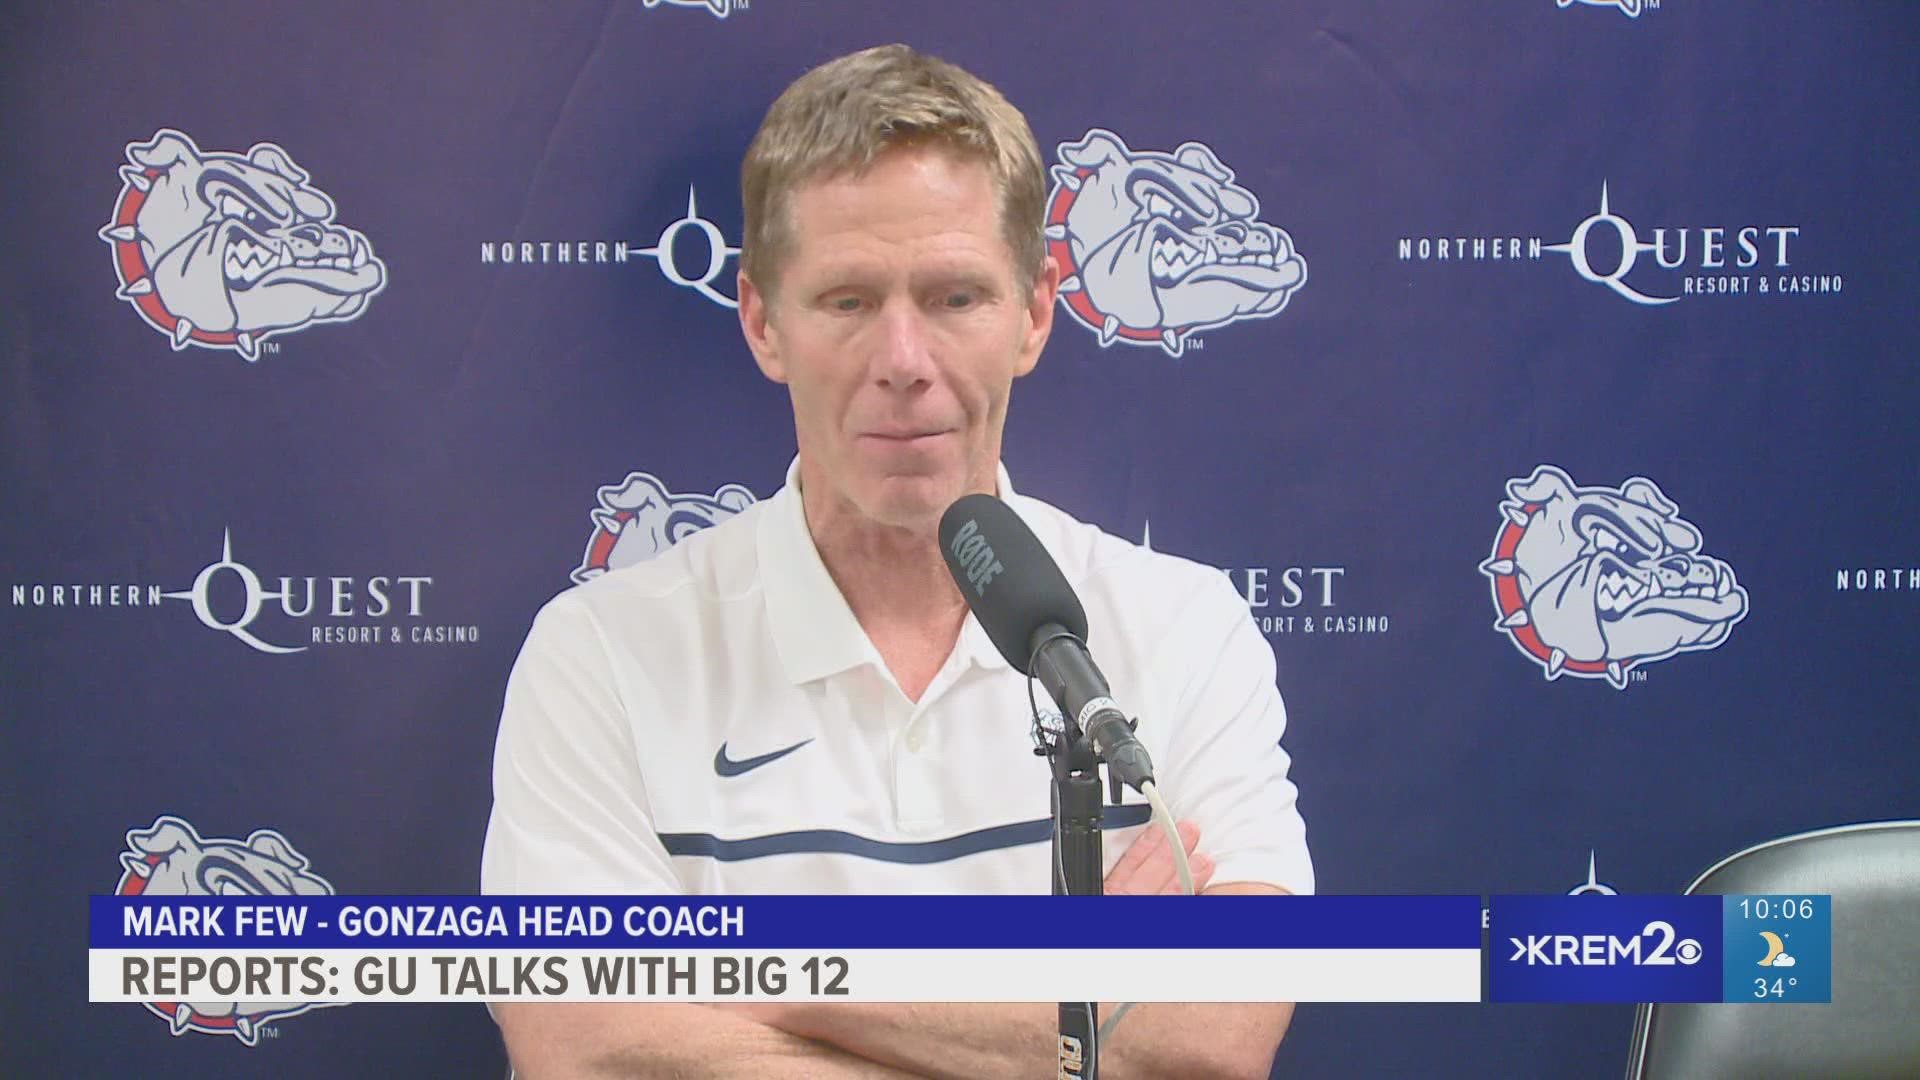 Reports say Gonzaga athletic director Chris Standiford met with Big 12 Commissioner Brett Yormark to discuss the possibility of Gonzaga joining the conference.